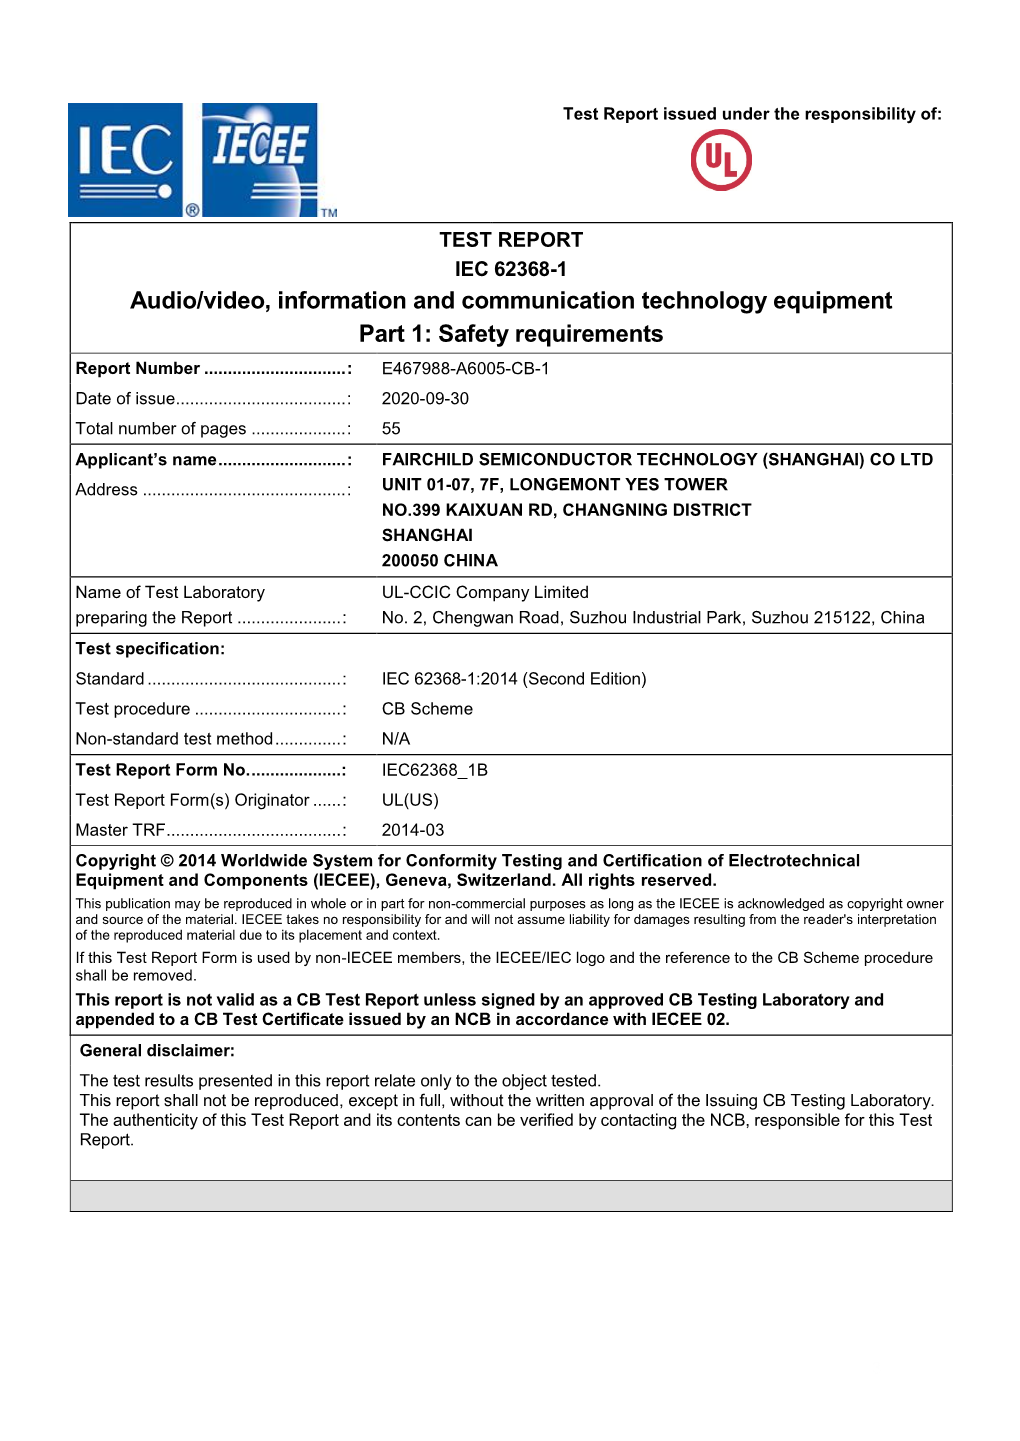 Audio/Video, Information and Communication Technology Equipment Part 1: Safety Requirements Report Number